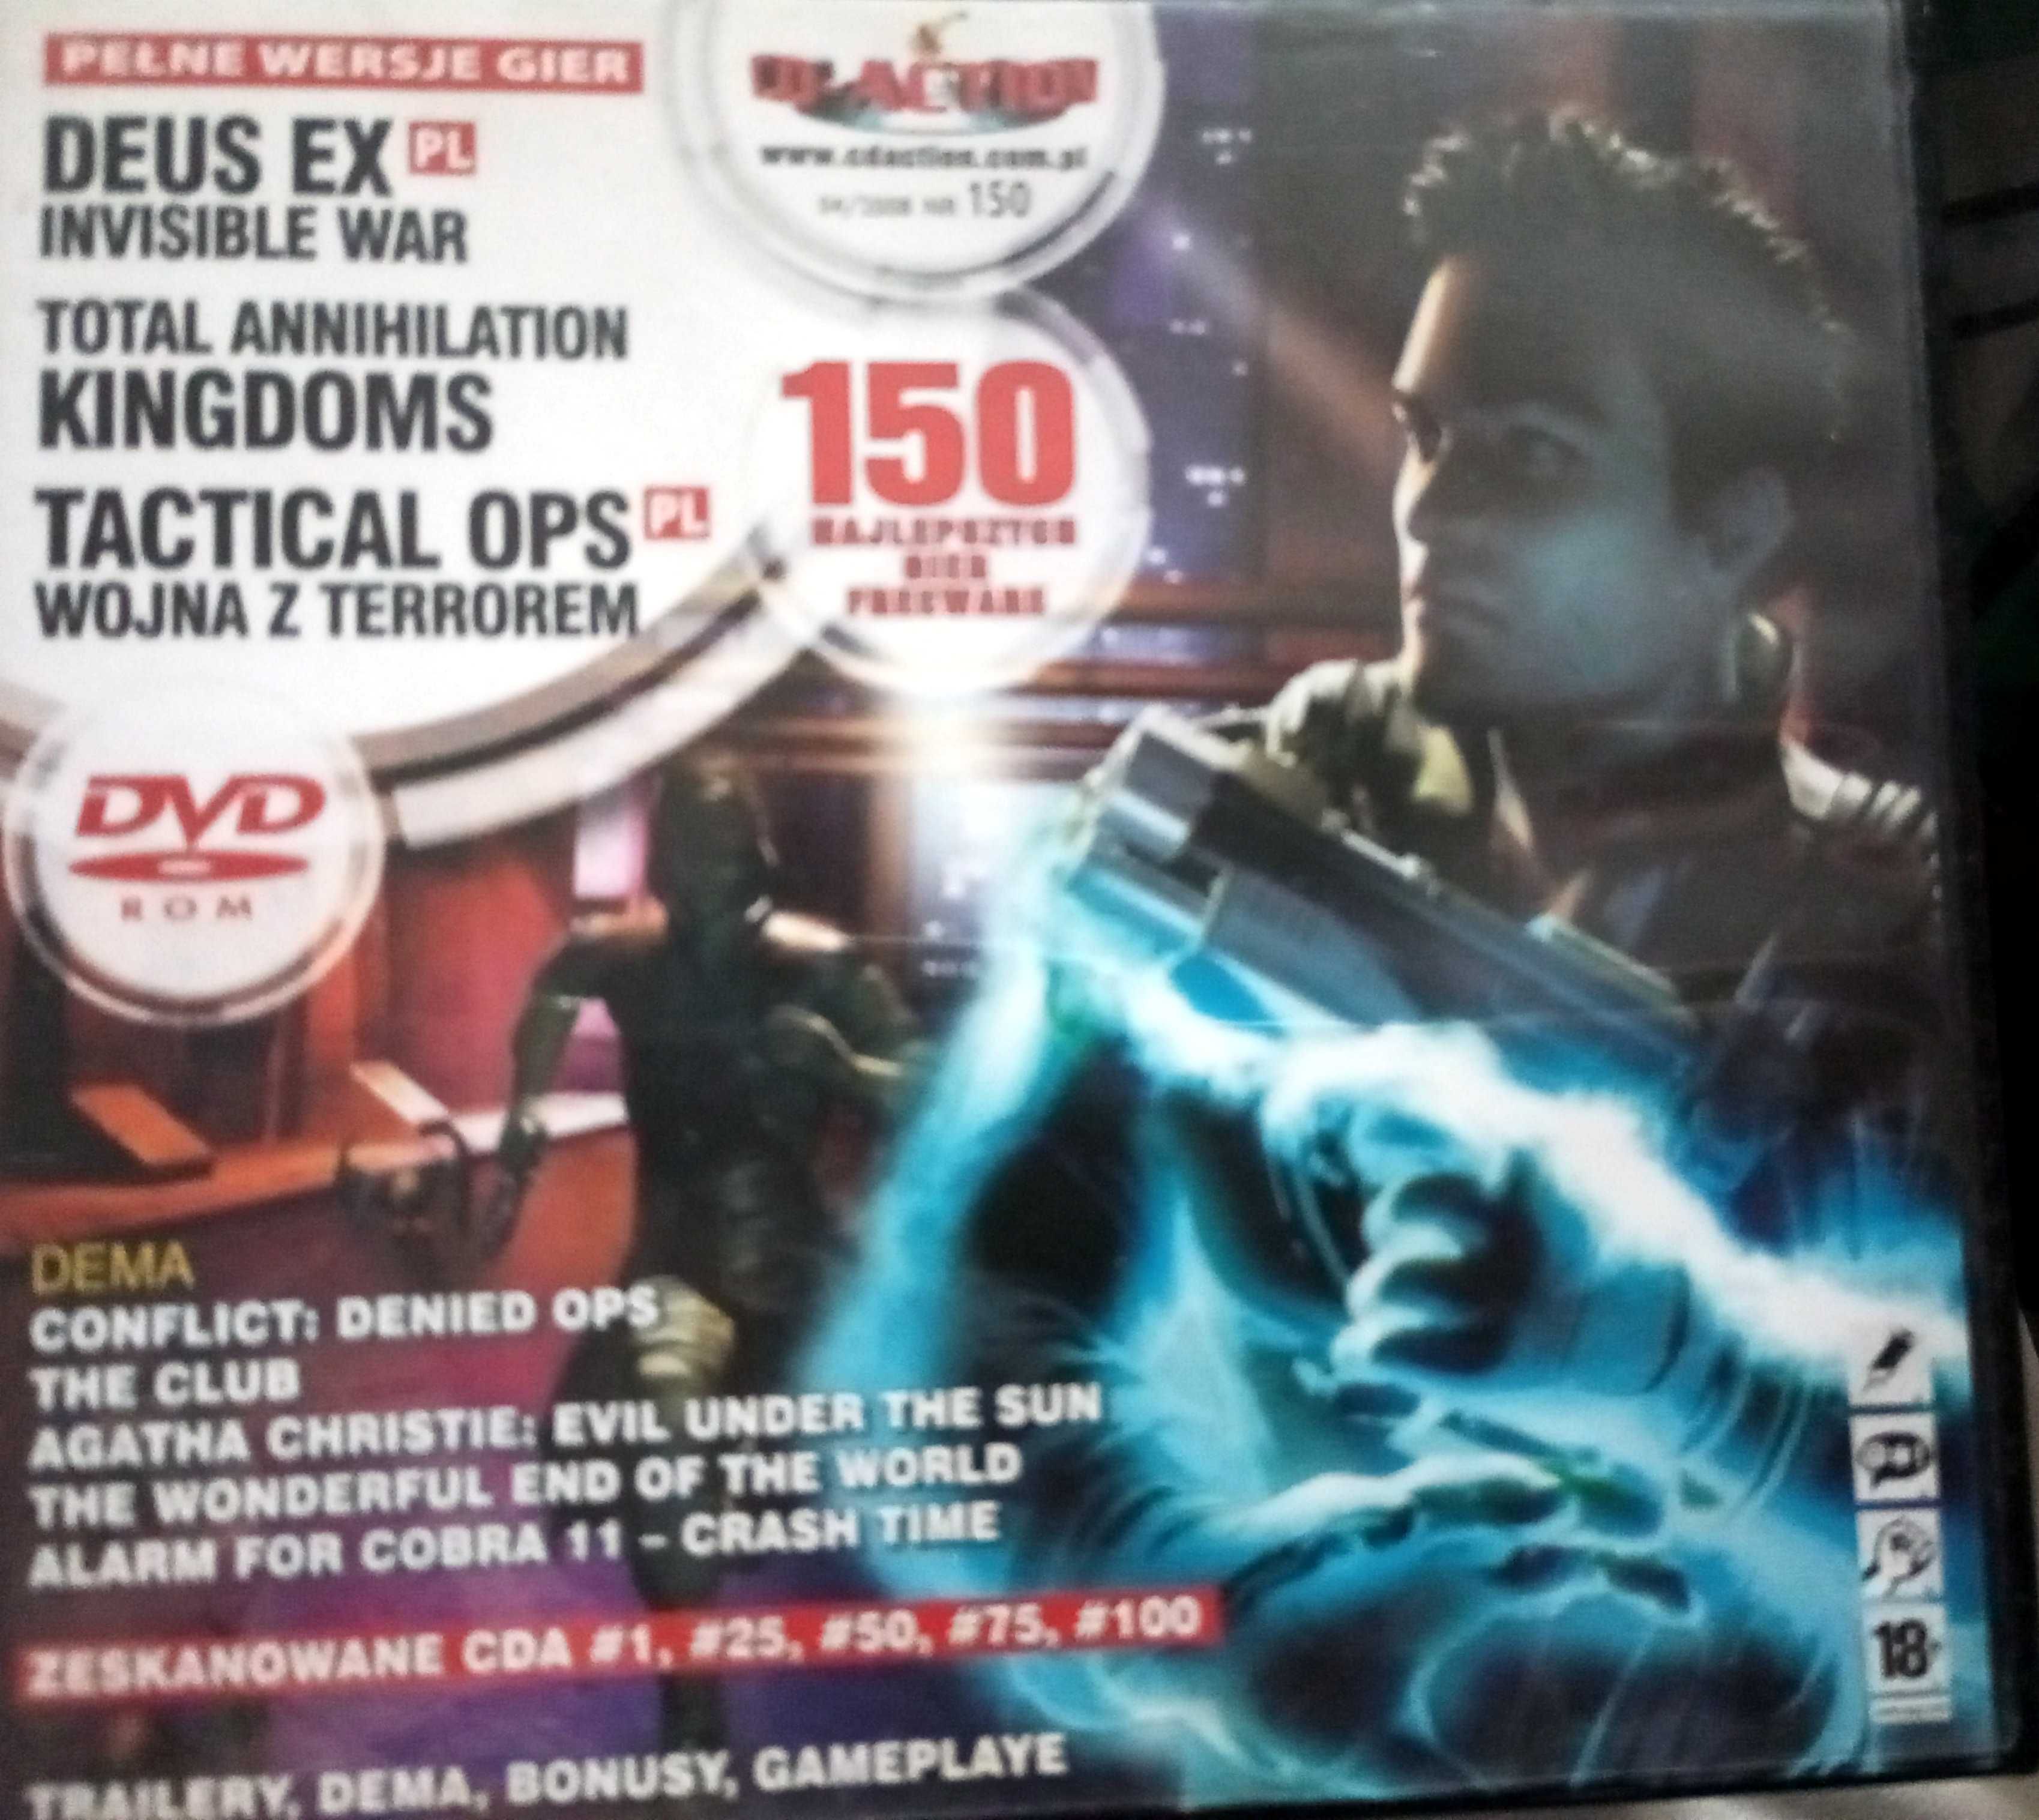 CD-ACTION 4/2008 #150 - Deus Ex: Invisible War PL, Tactical Ops +INNE